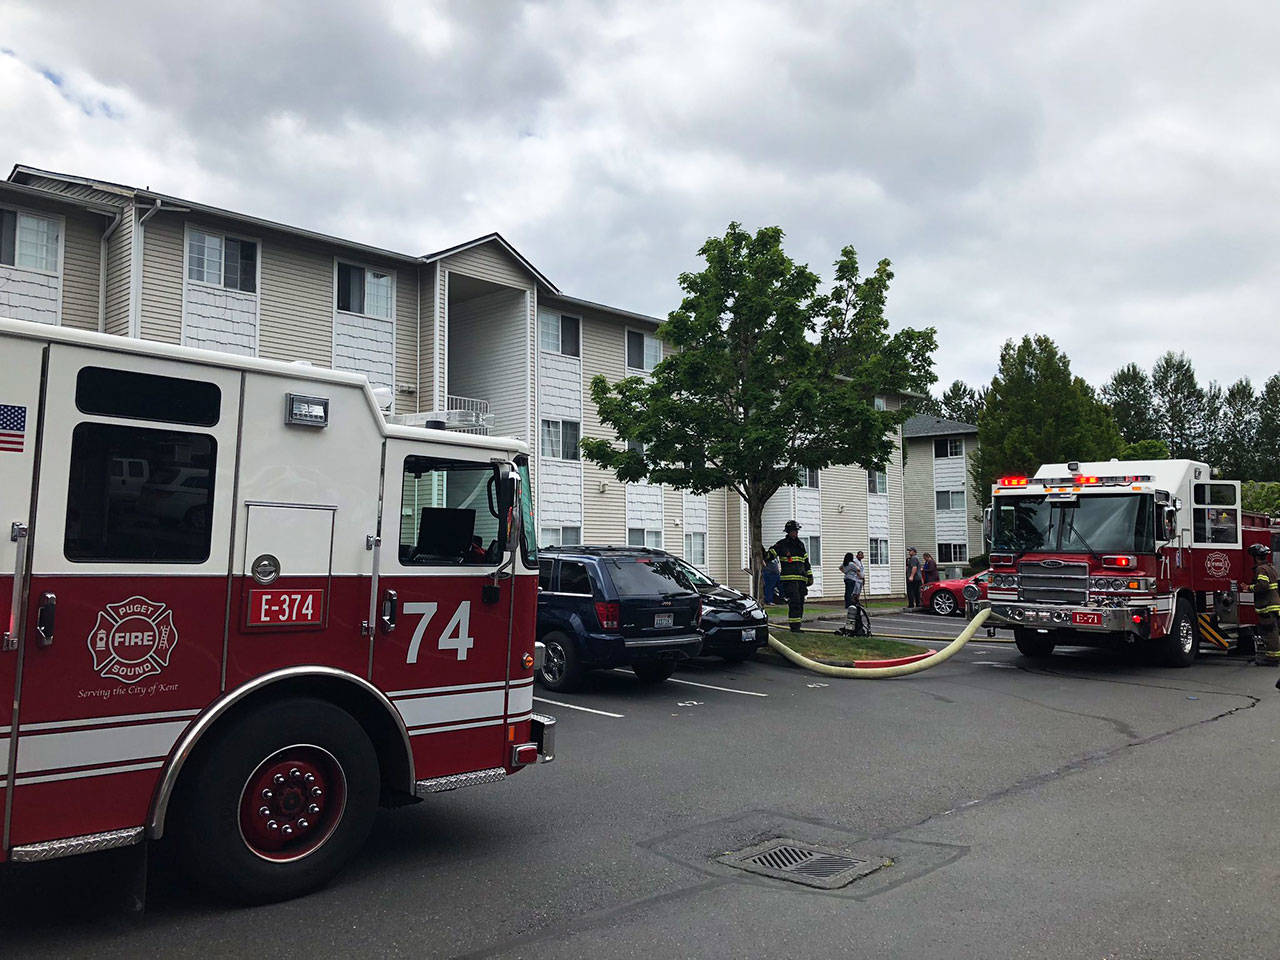 Puget Sound Fire responds to a kitchen fire June 24 at the Alderbrook Apartments in the 400 block of Novak Lane. COURTESY PHOTO, Puget Sound Fire